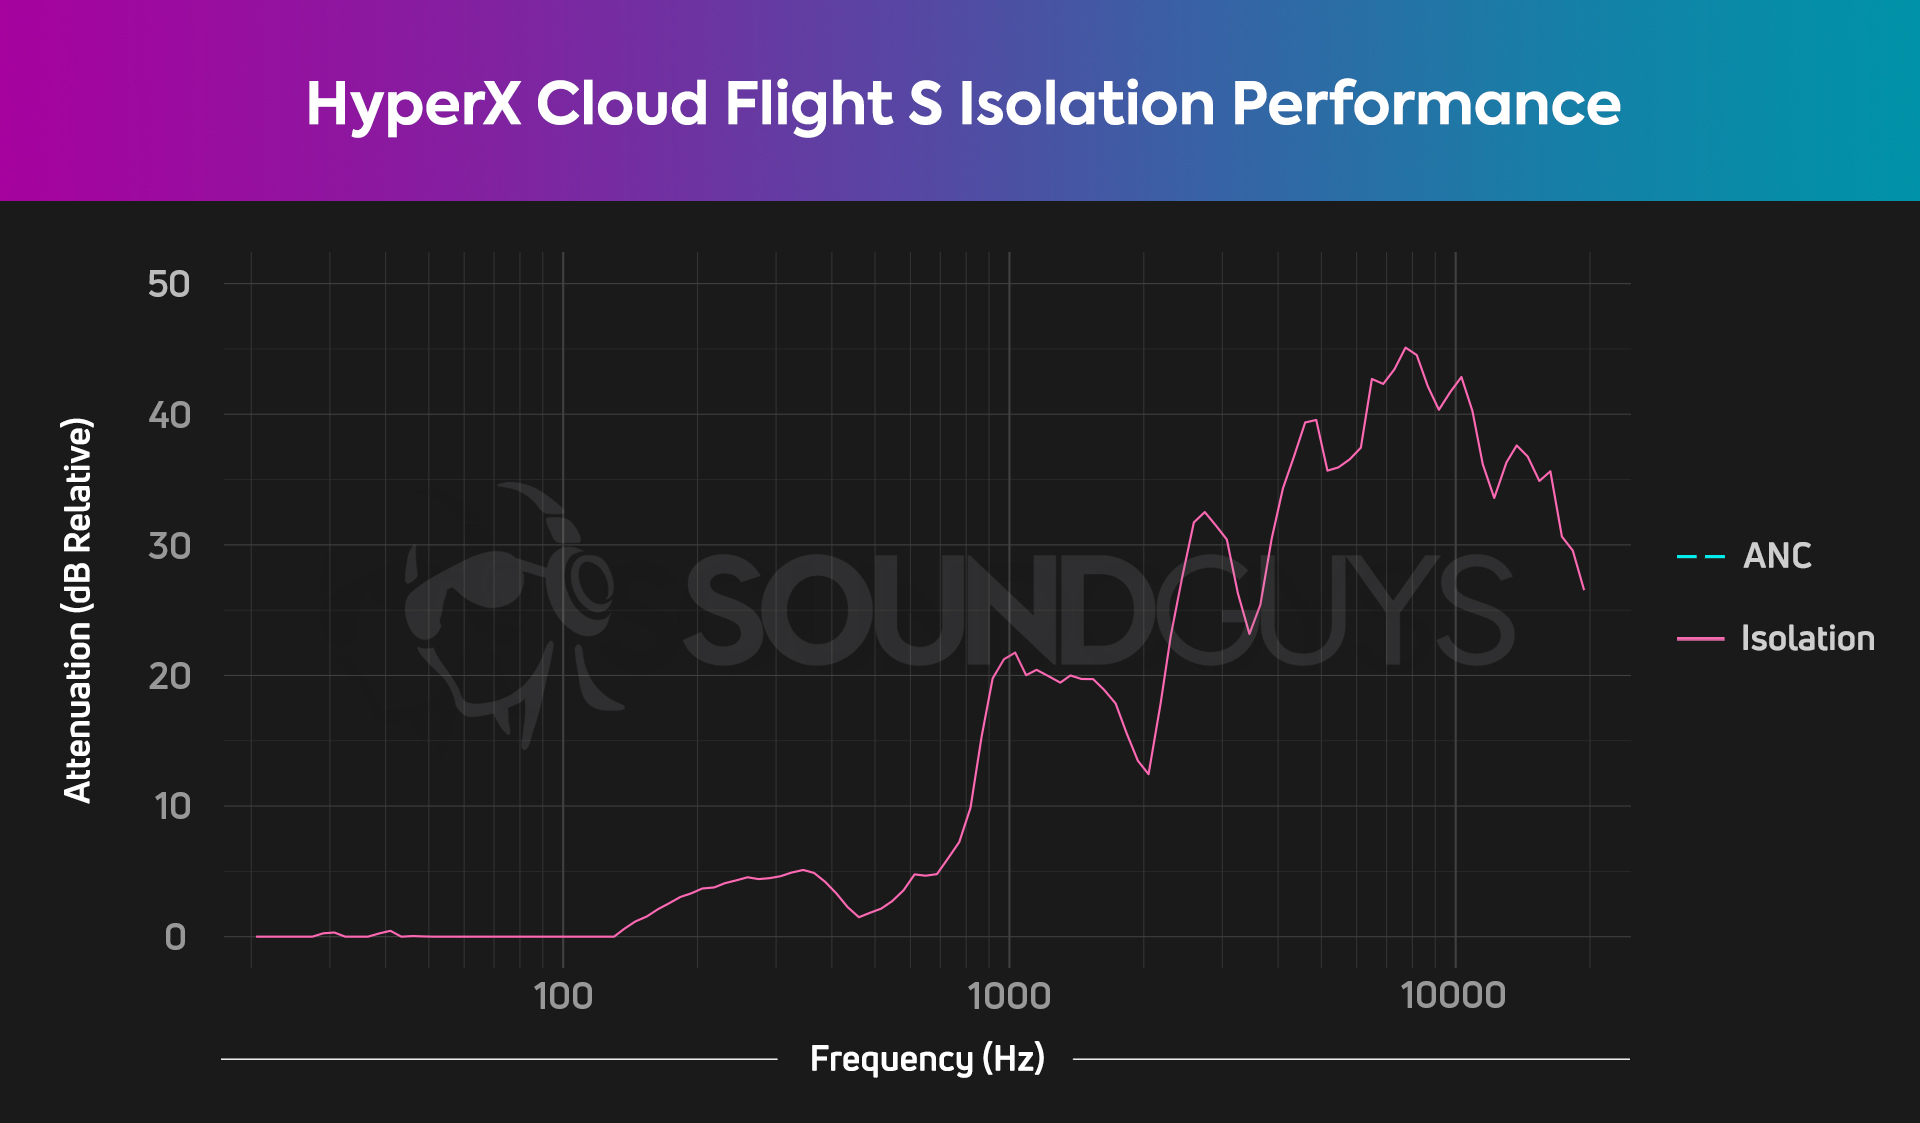 An isolation chart for the HyperX Cloud Flight S gaming headset, which shows better isolation around 1000Hz than most gaming headsets.